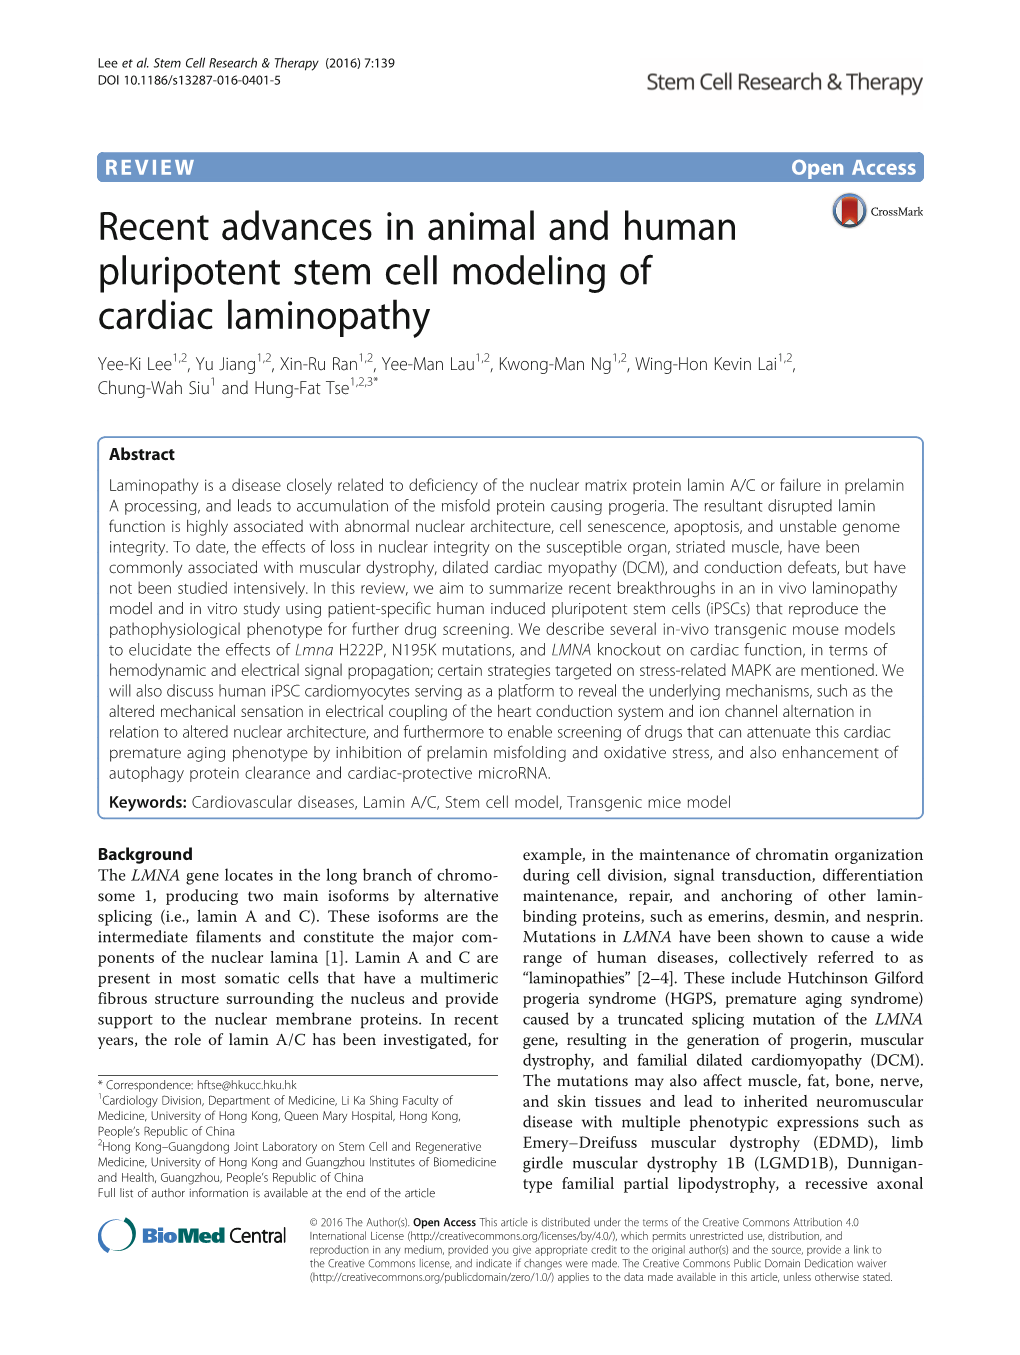 Recent Advances in Animal and Human Pluripotent Stem Cell